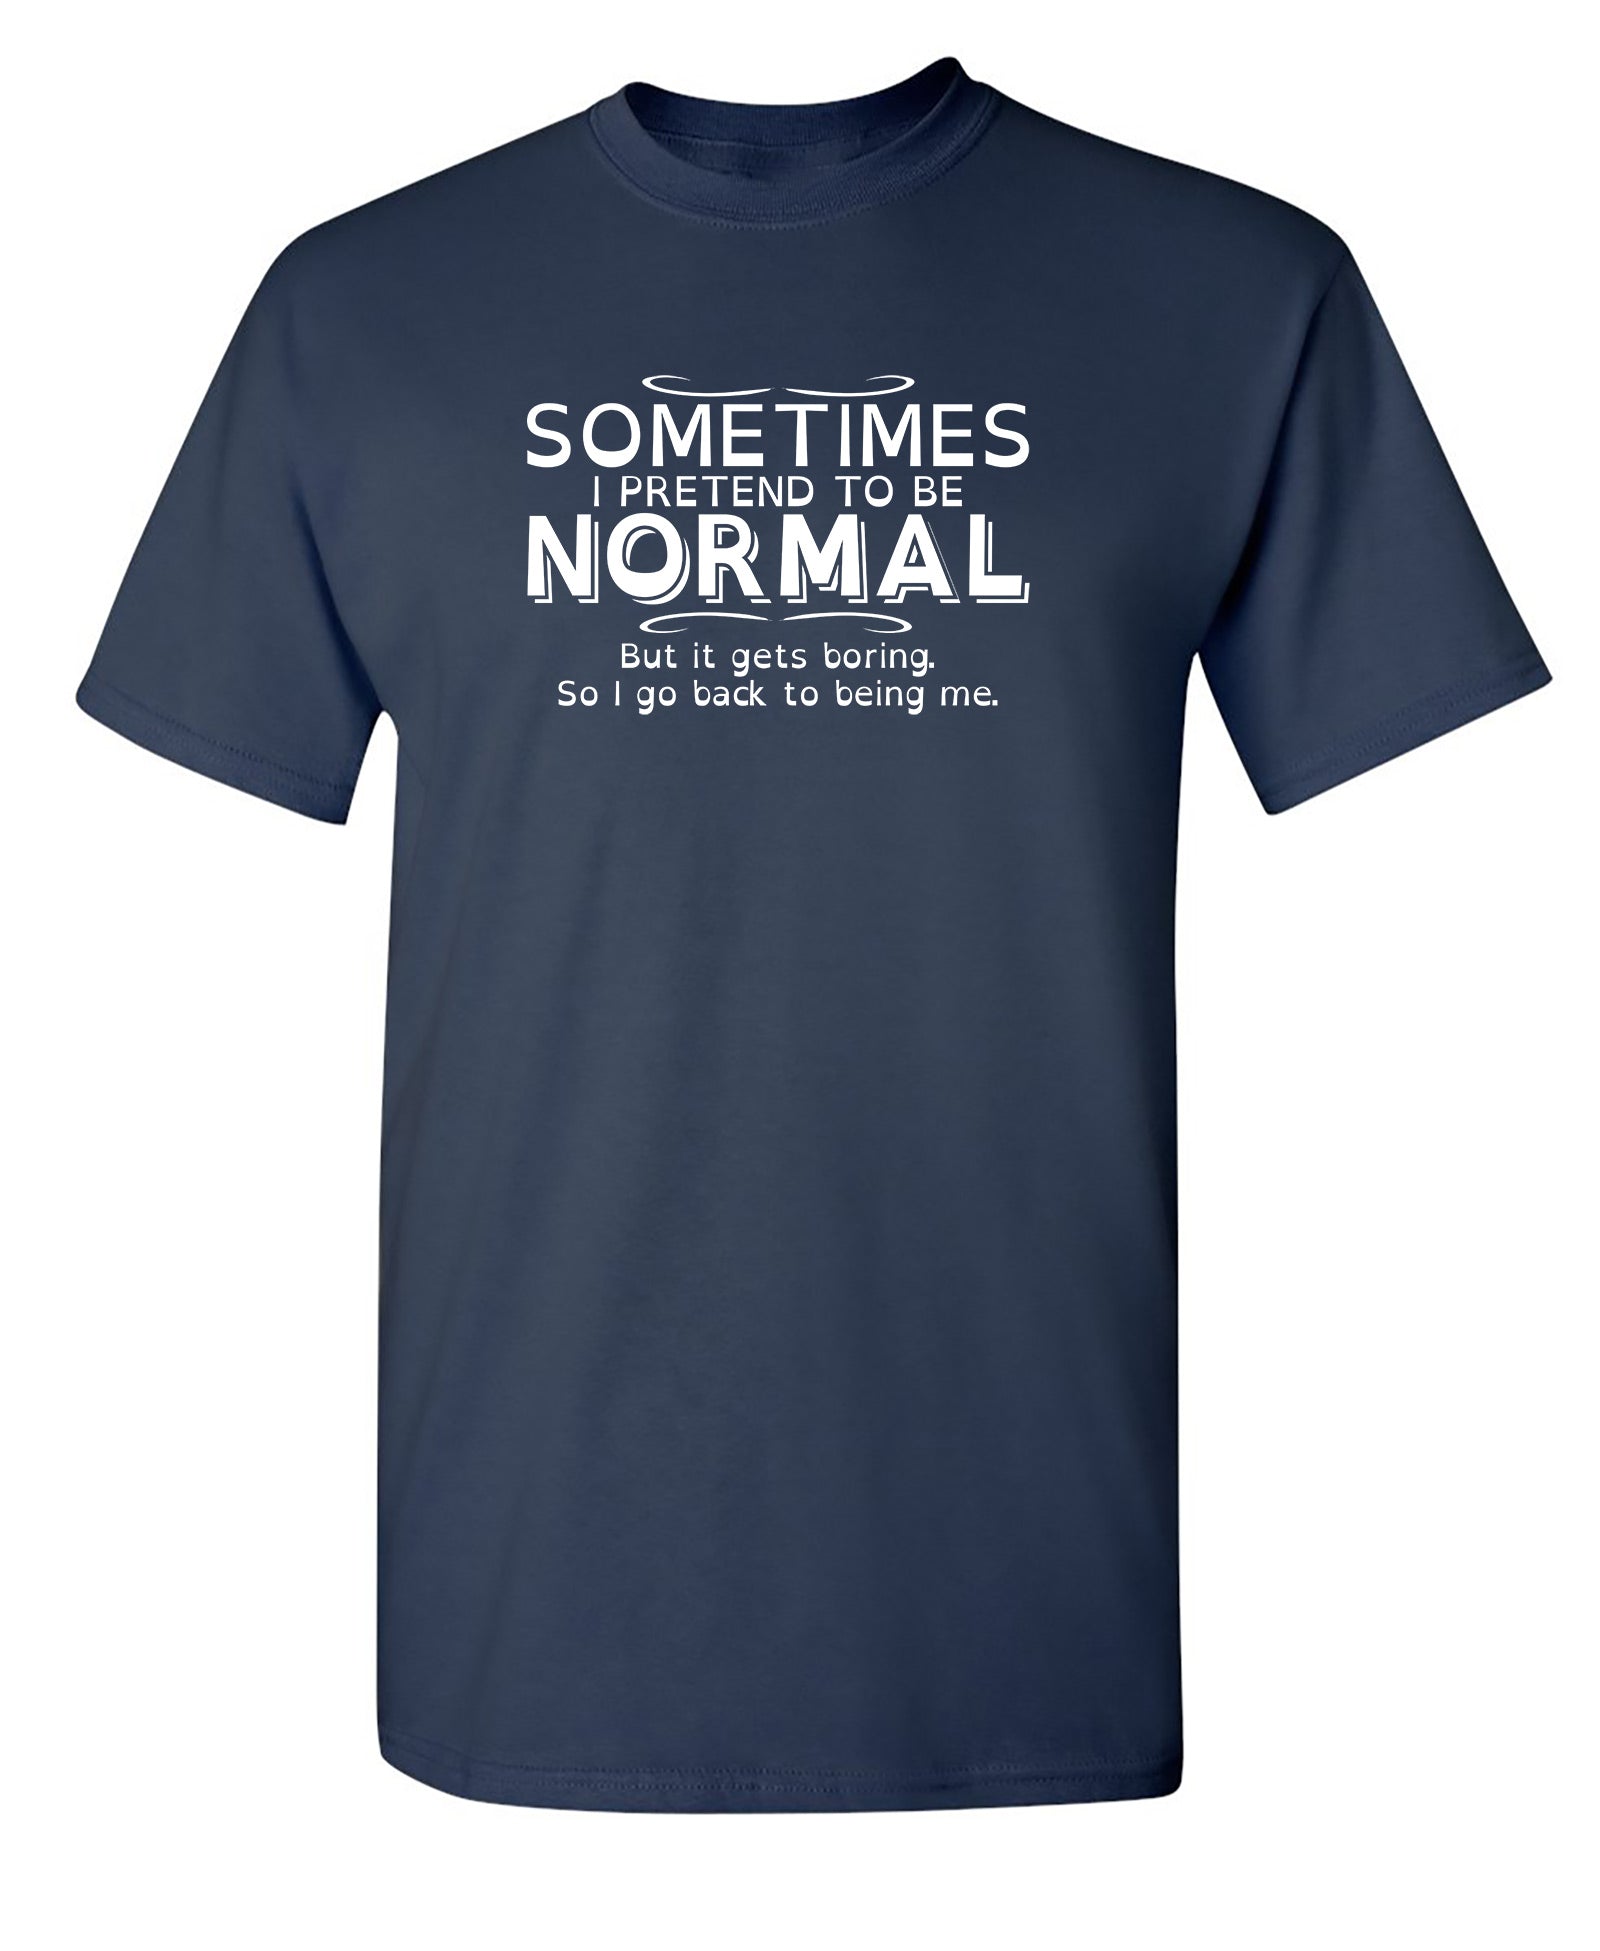 Sometimes I Pretend To Be Normal, But It Gets Boring So I Go Back Being Me - Funny T Shirts & Graphic Tees